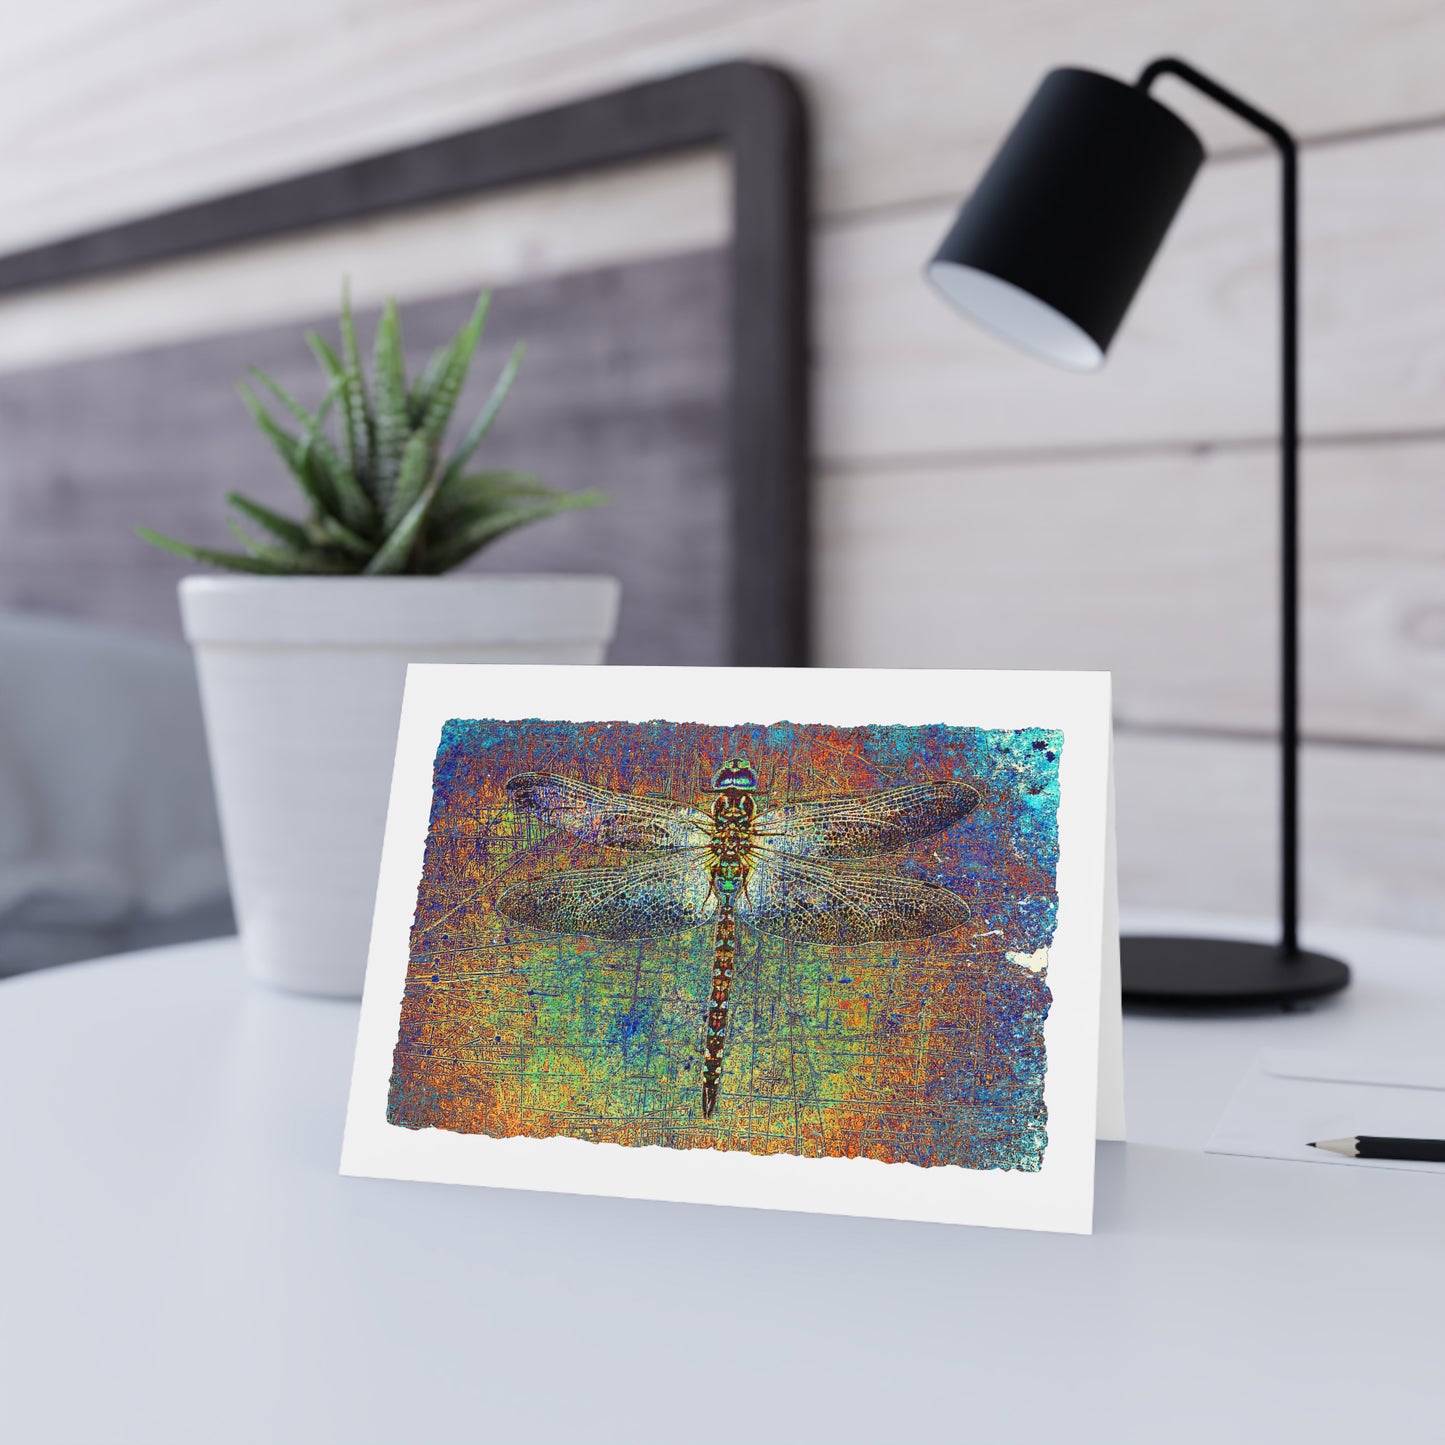 Dragonfly Print Greeting Cards Multicolor Dragonfly Stationery and Blank Cards under light